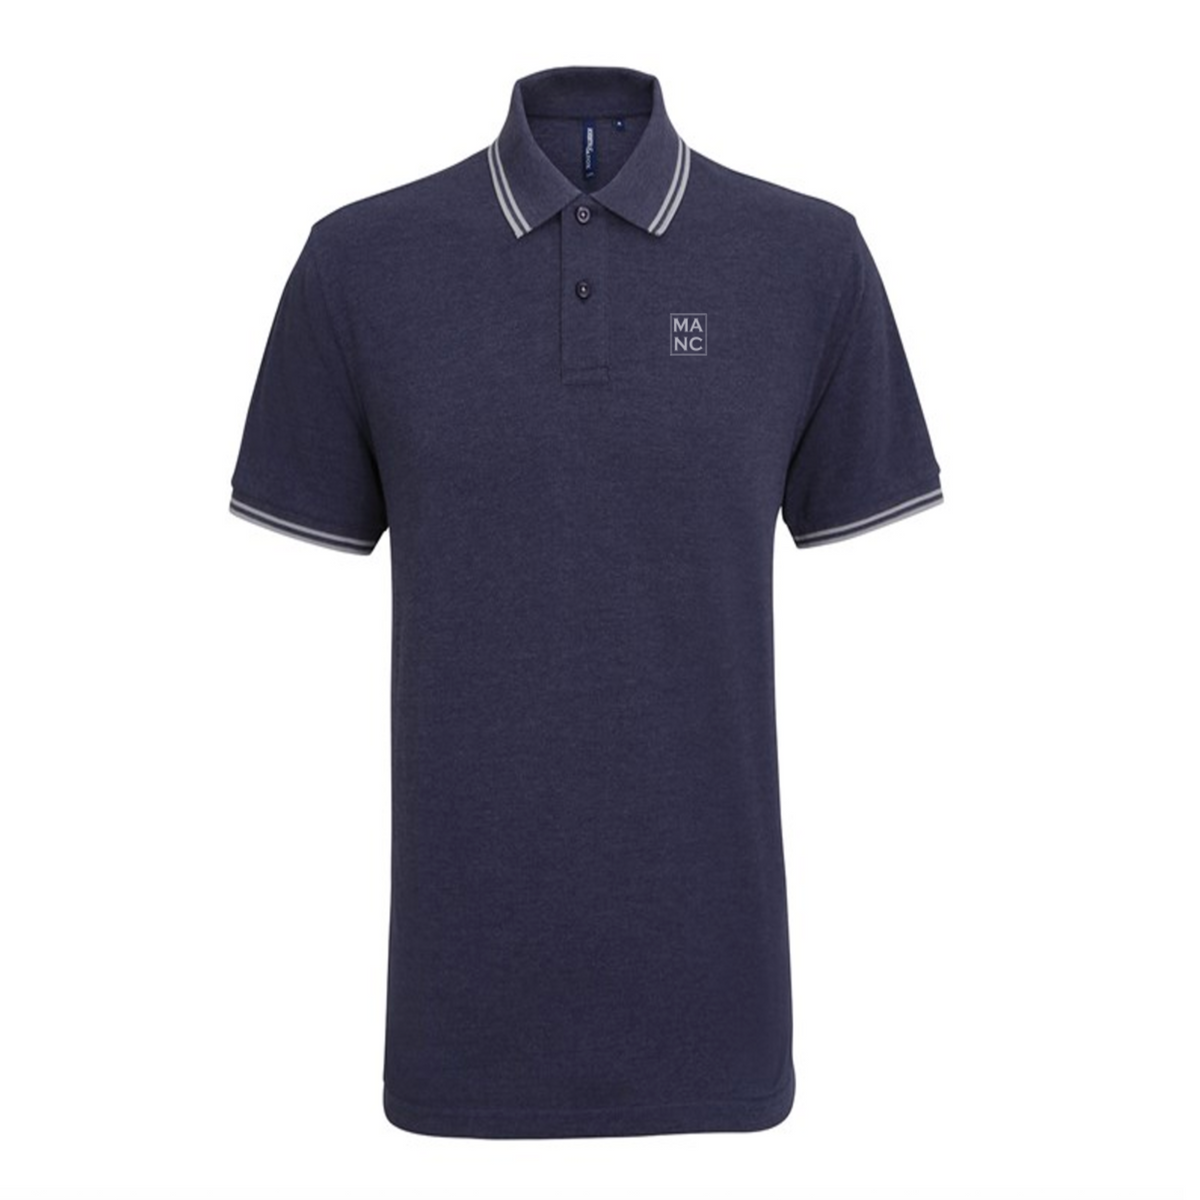 BeeManc Embroidered Manc Tipped Polo Shirt - Navy/Heather Grey